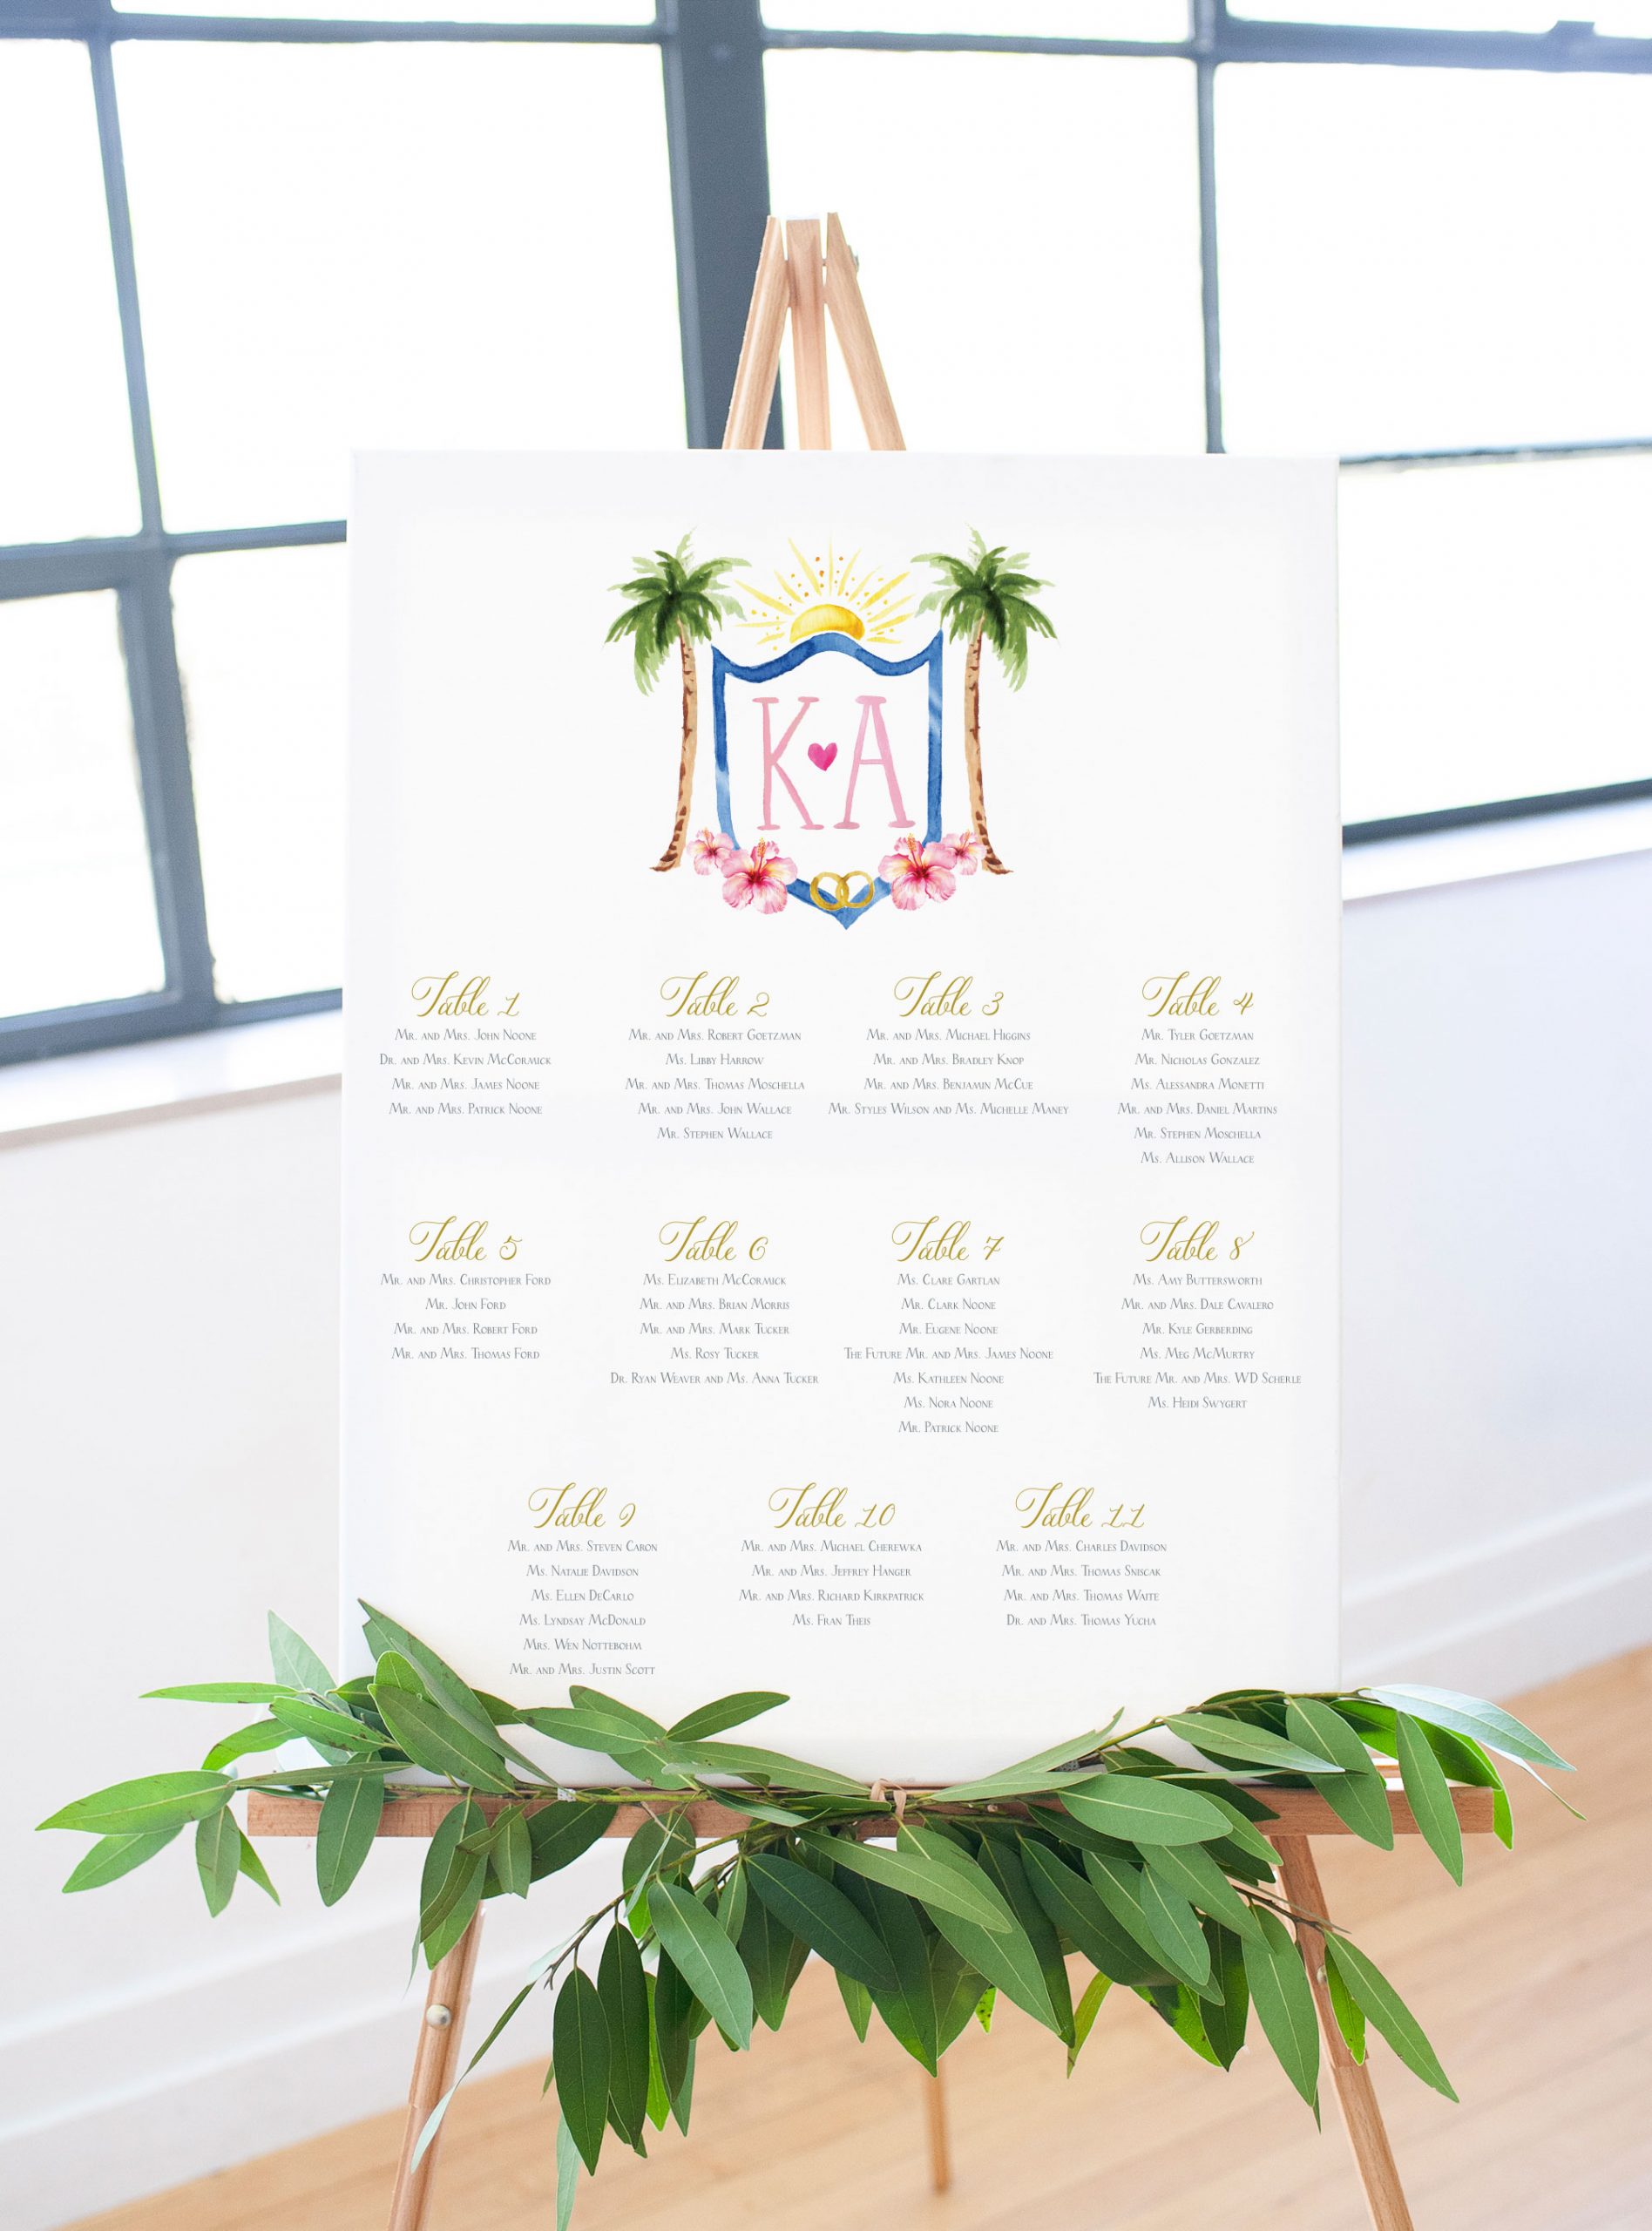 Wedding Seating Chart Poster Board